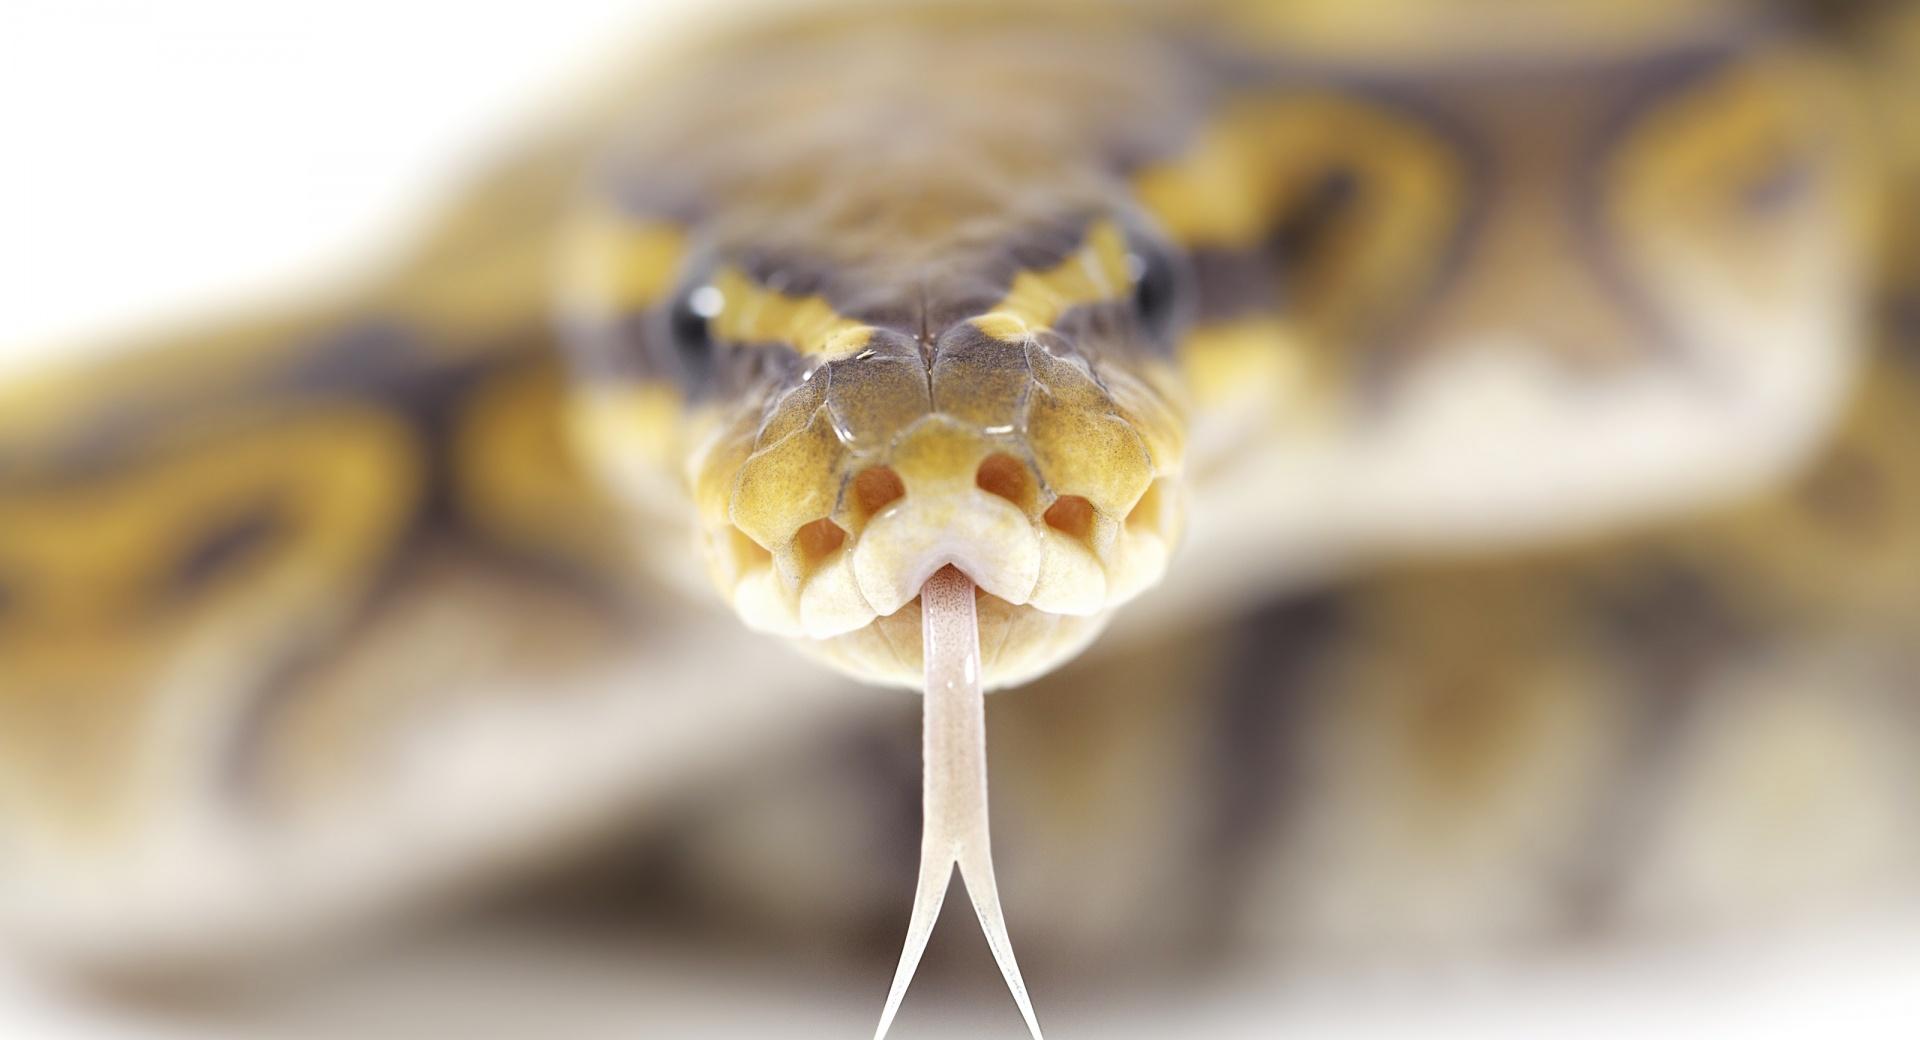 Snake Close Up wallpapers HD quality